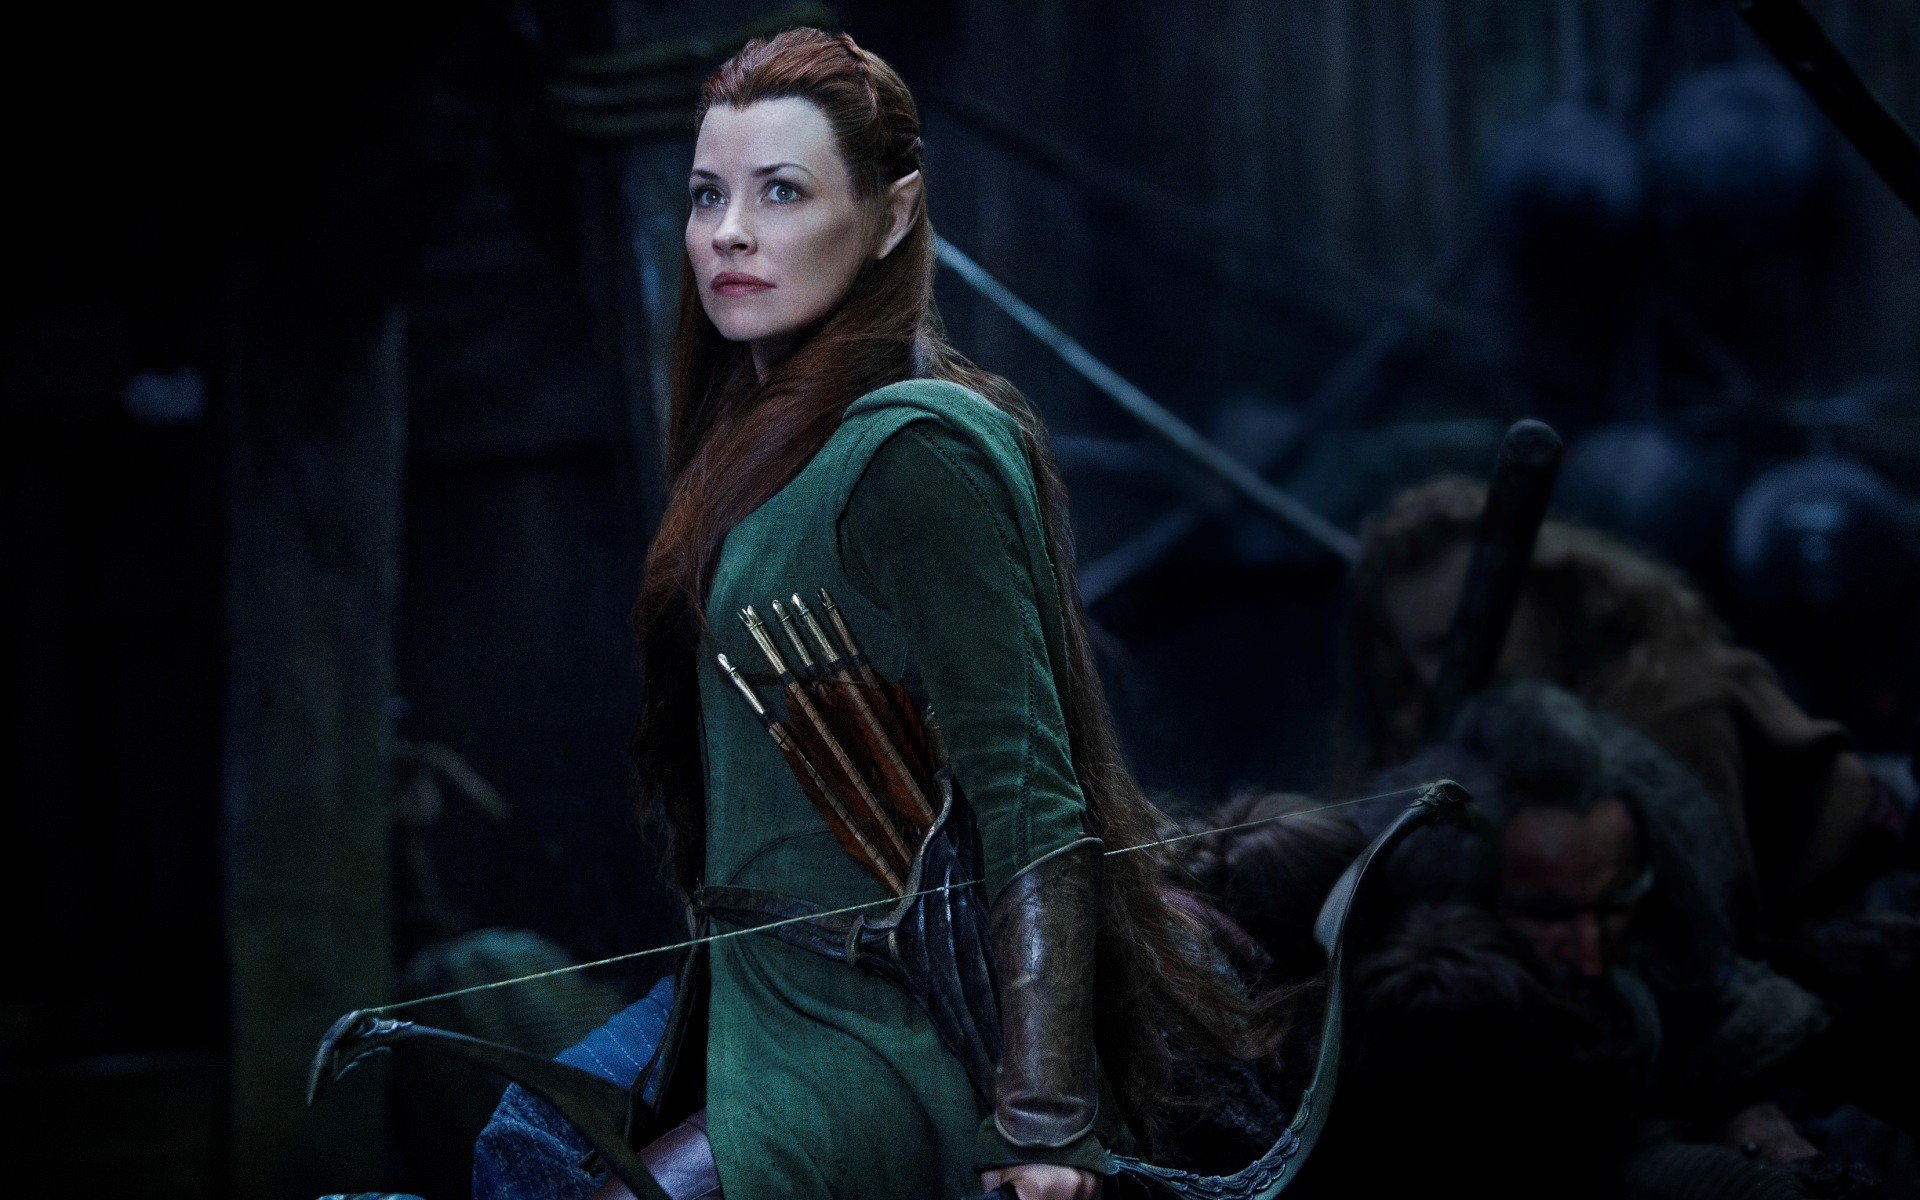 The Hobbit, Tauriel, Redhead, Women, Movies, Evangeline Lilly, Hair bows, The Hobbit: The Battle of the Five Armies Wallpaper